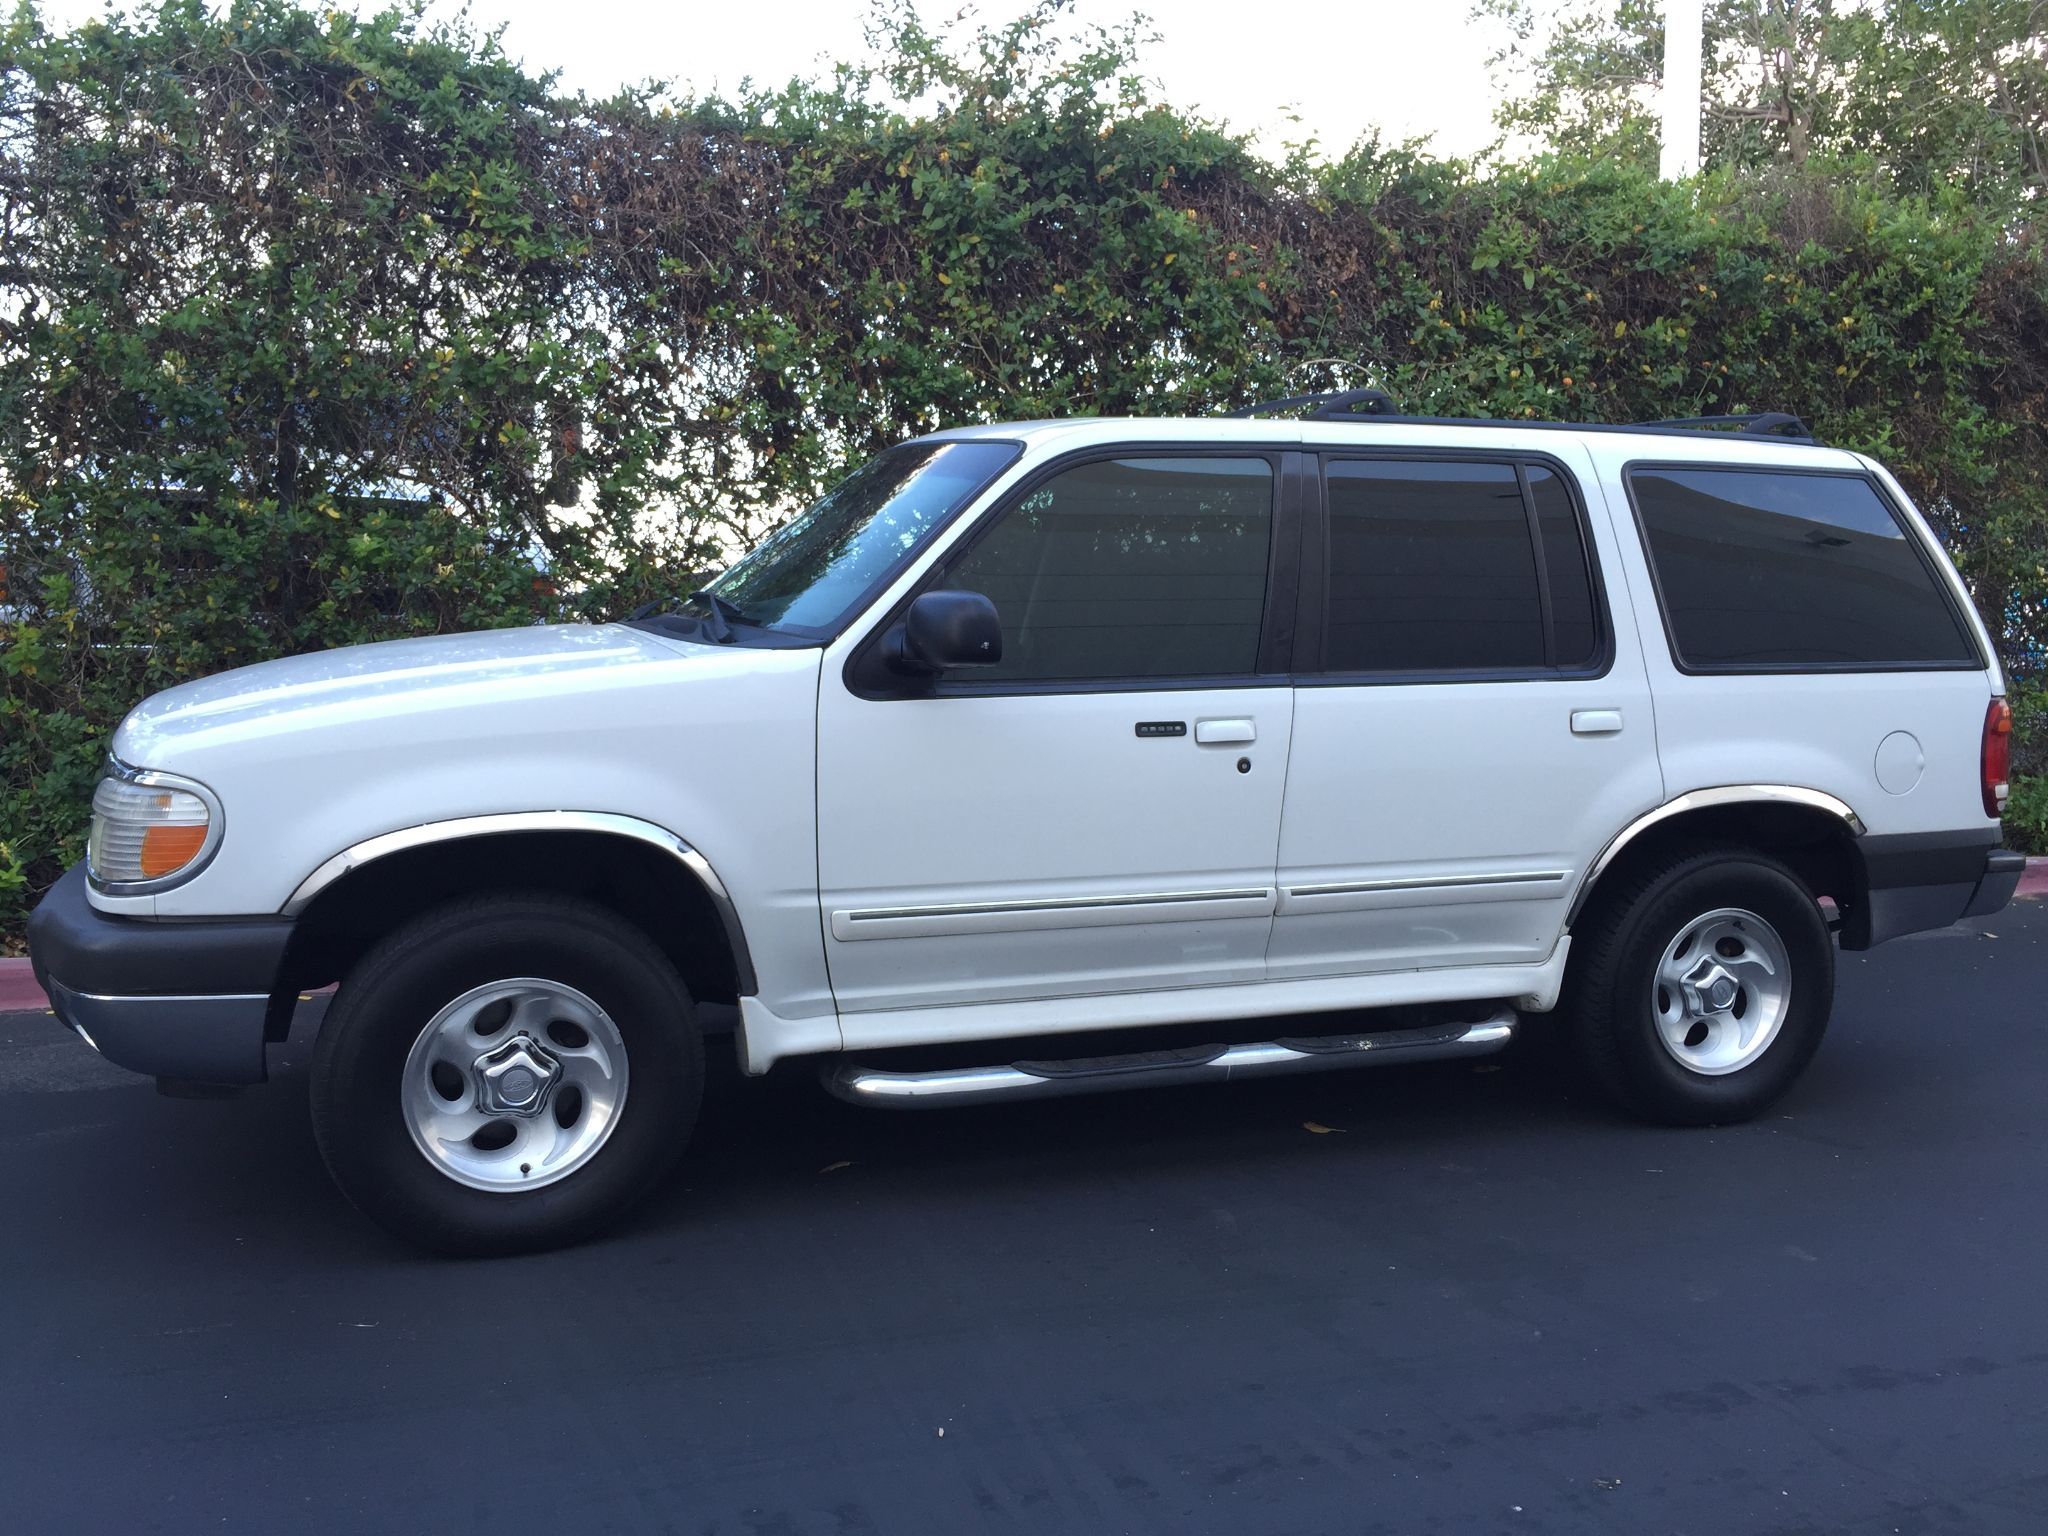 Used 2001 Ford Explorer XLT at City Cars Warehouse Inc